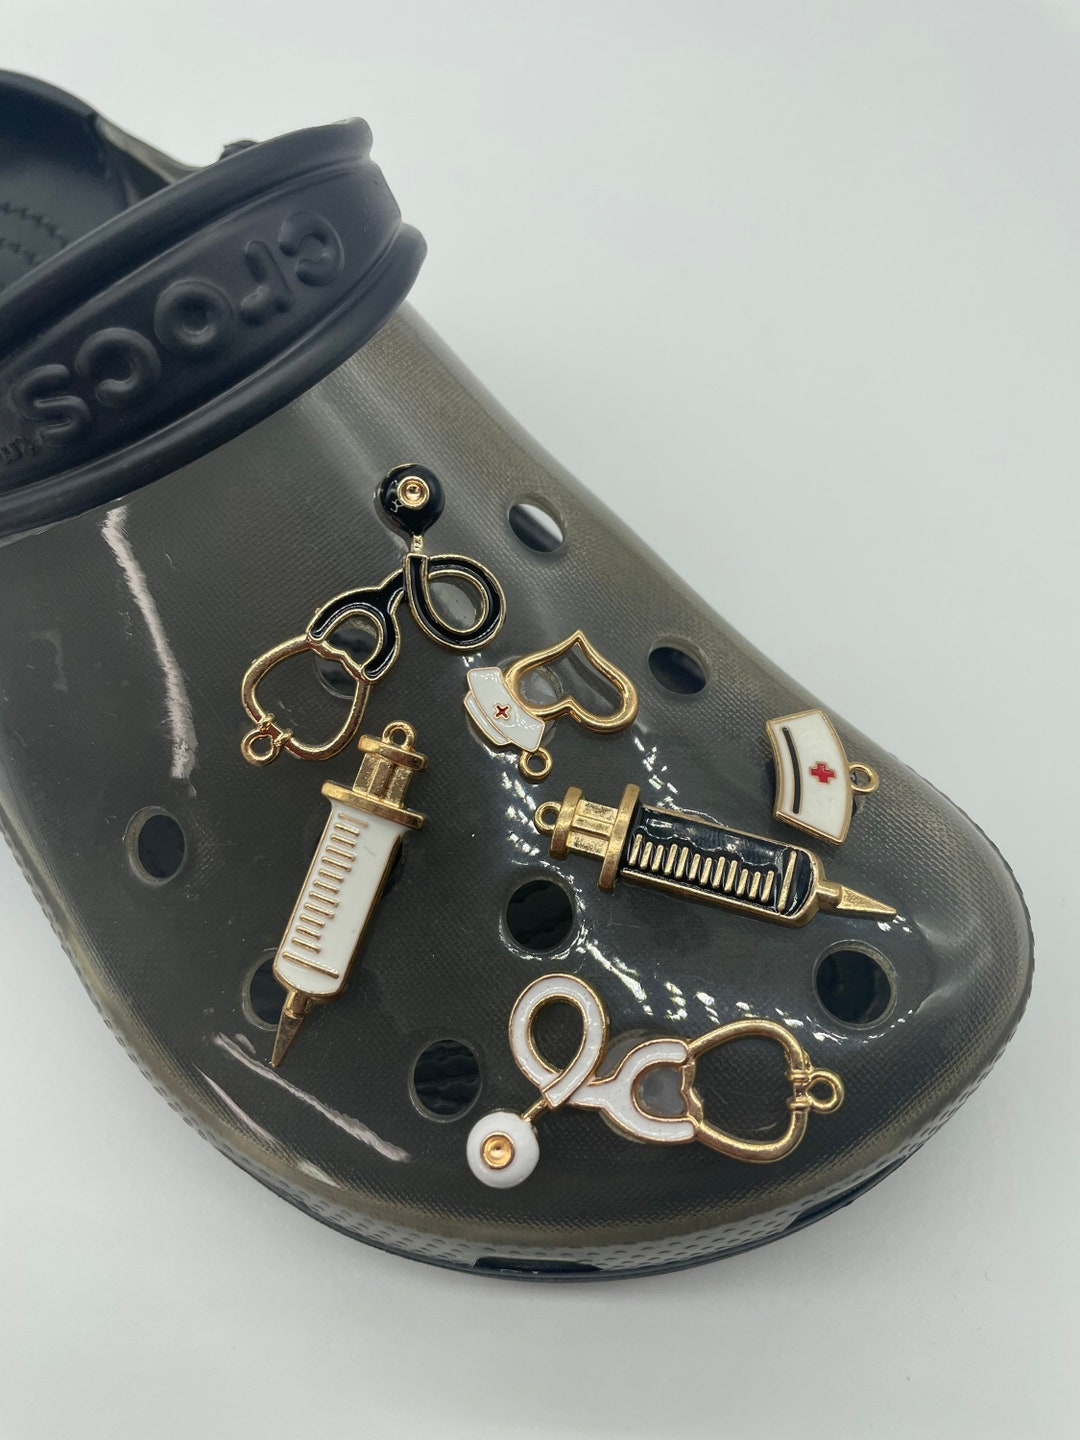 Snoopy Inspired Crocs Charms. Charlie Brown Peanut Gallery Croc